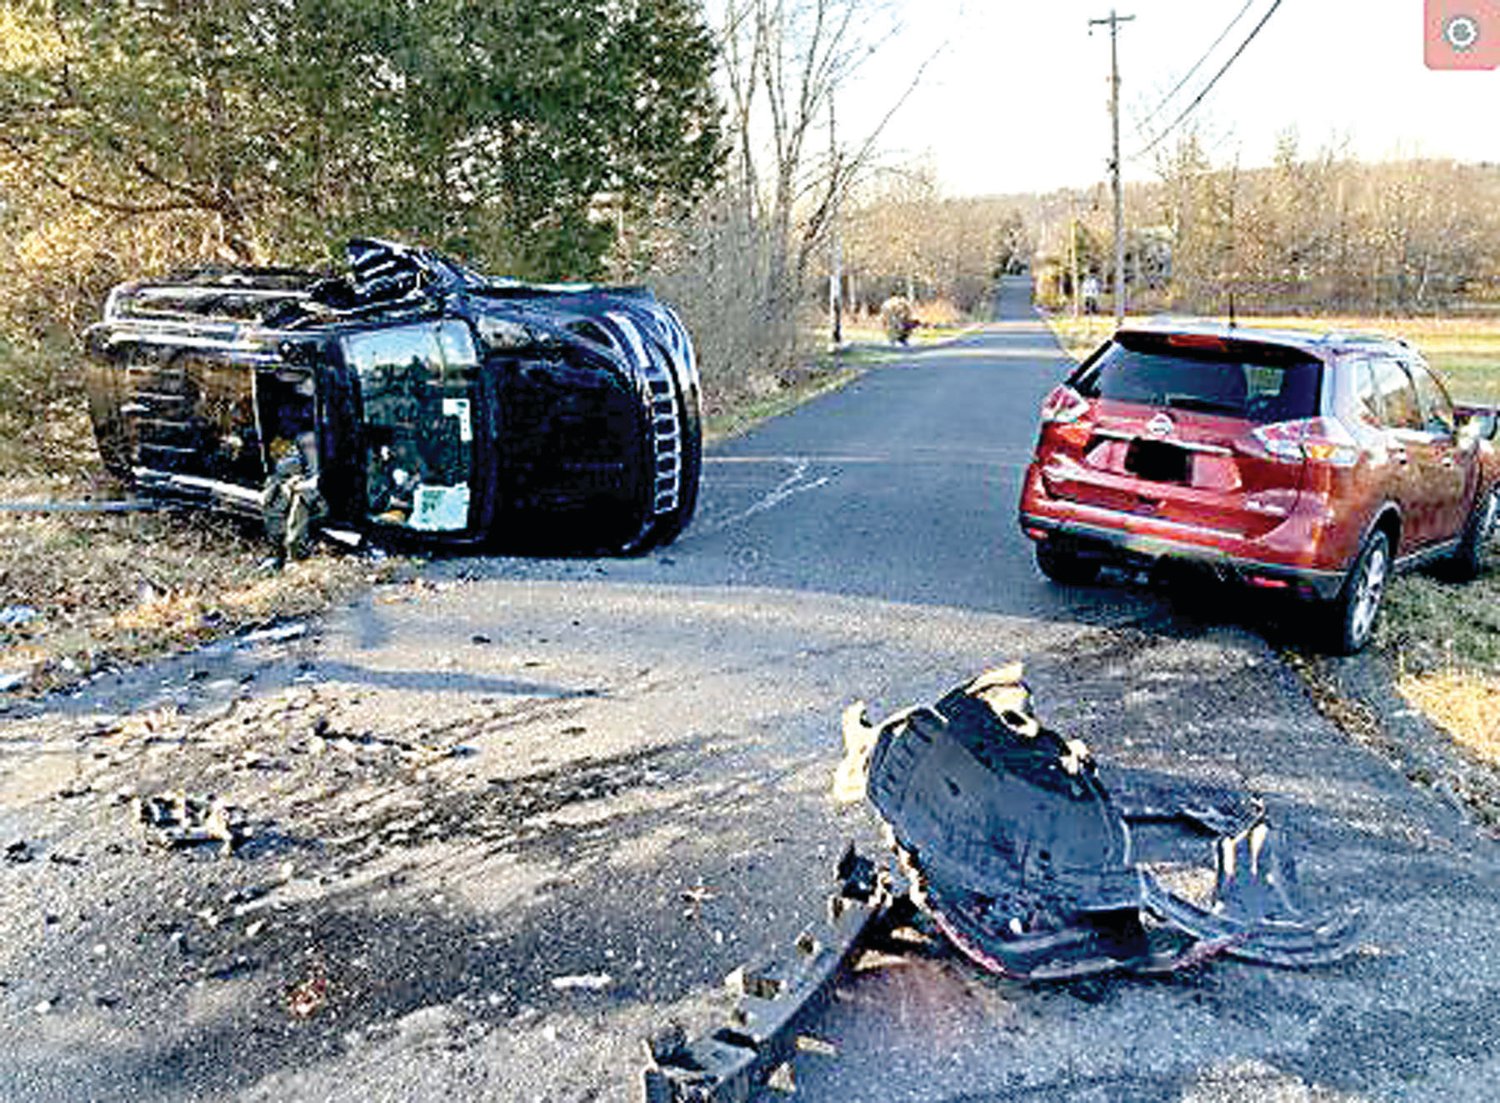 ew Britain Township Police are seeking witnesses to this two-vehicle crash with injuries, which occurred on New Galena Road and Newville Road in Chalfont at approximately 2:37 p.m. Dec. 22.